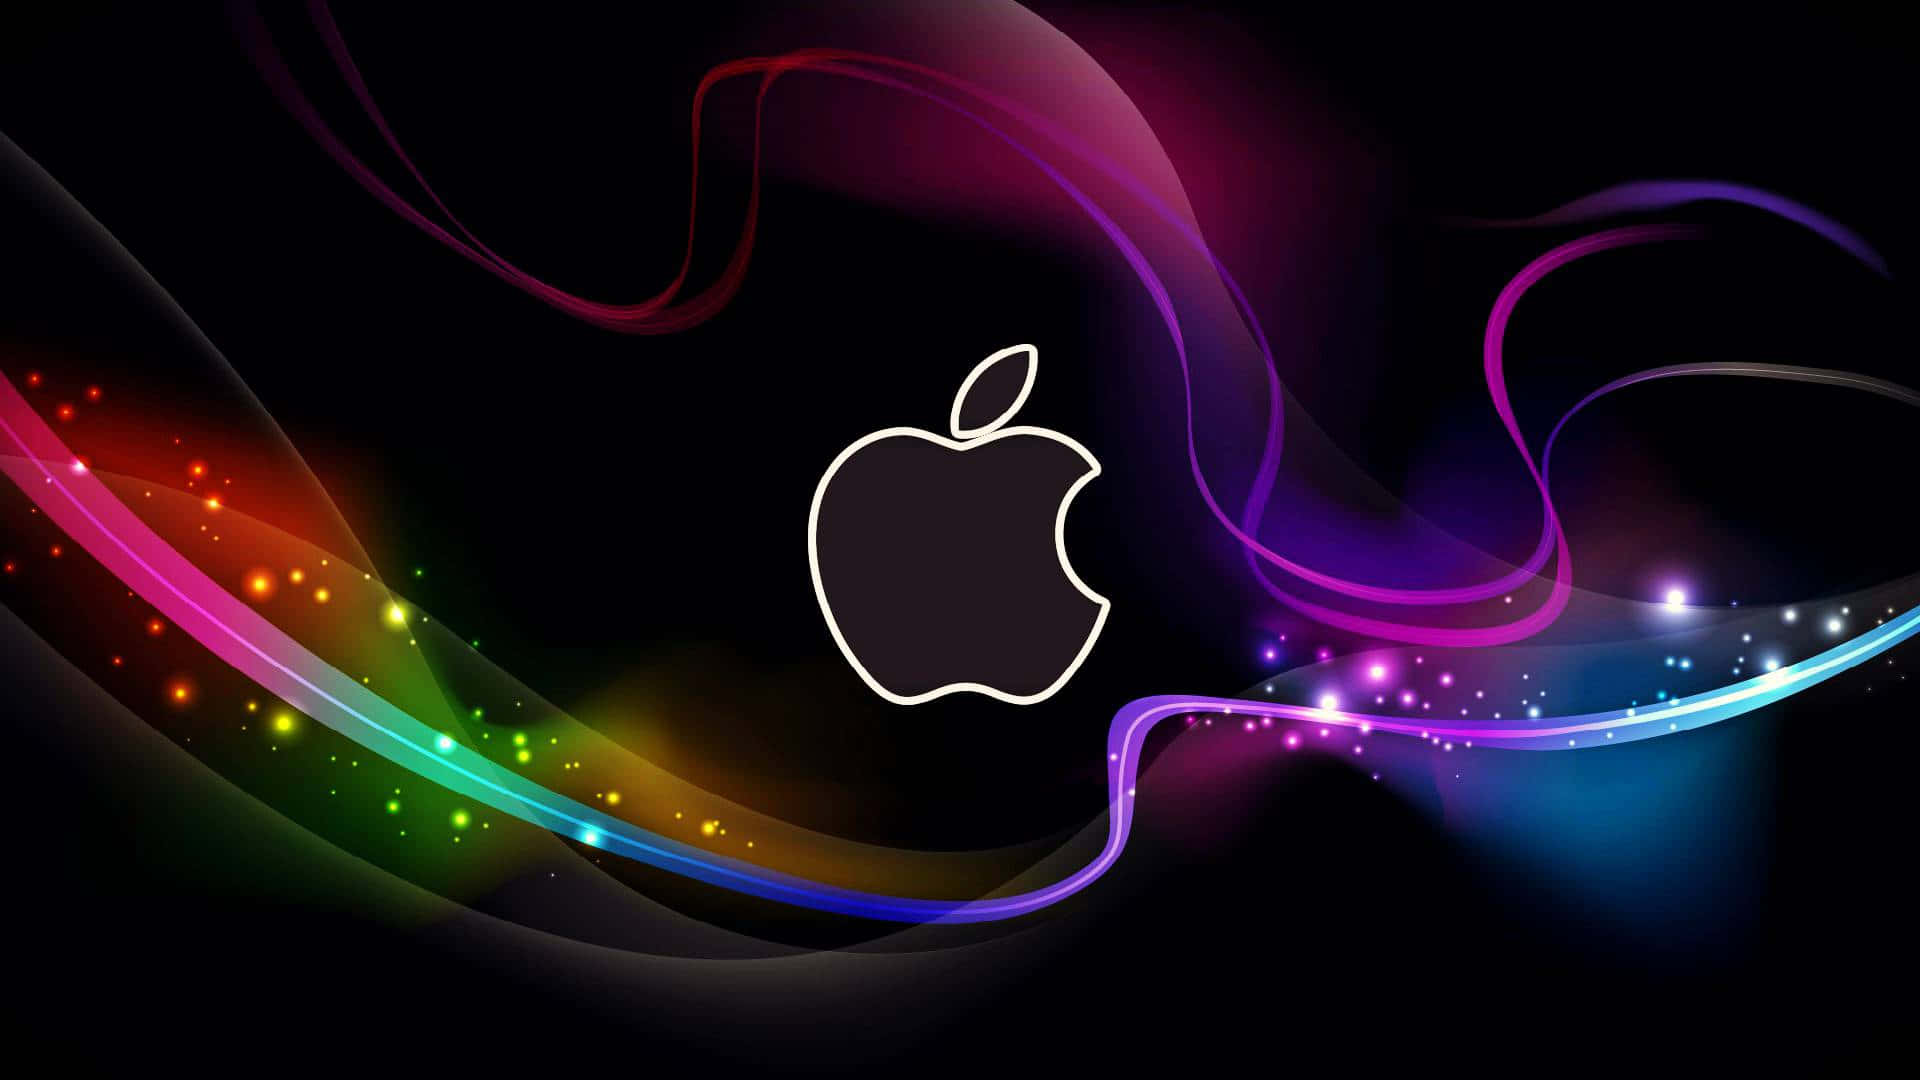 Cool Mac Logo Surrounded By Colorful Strings Wallpaper